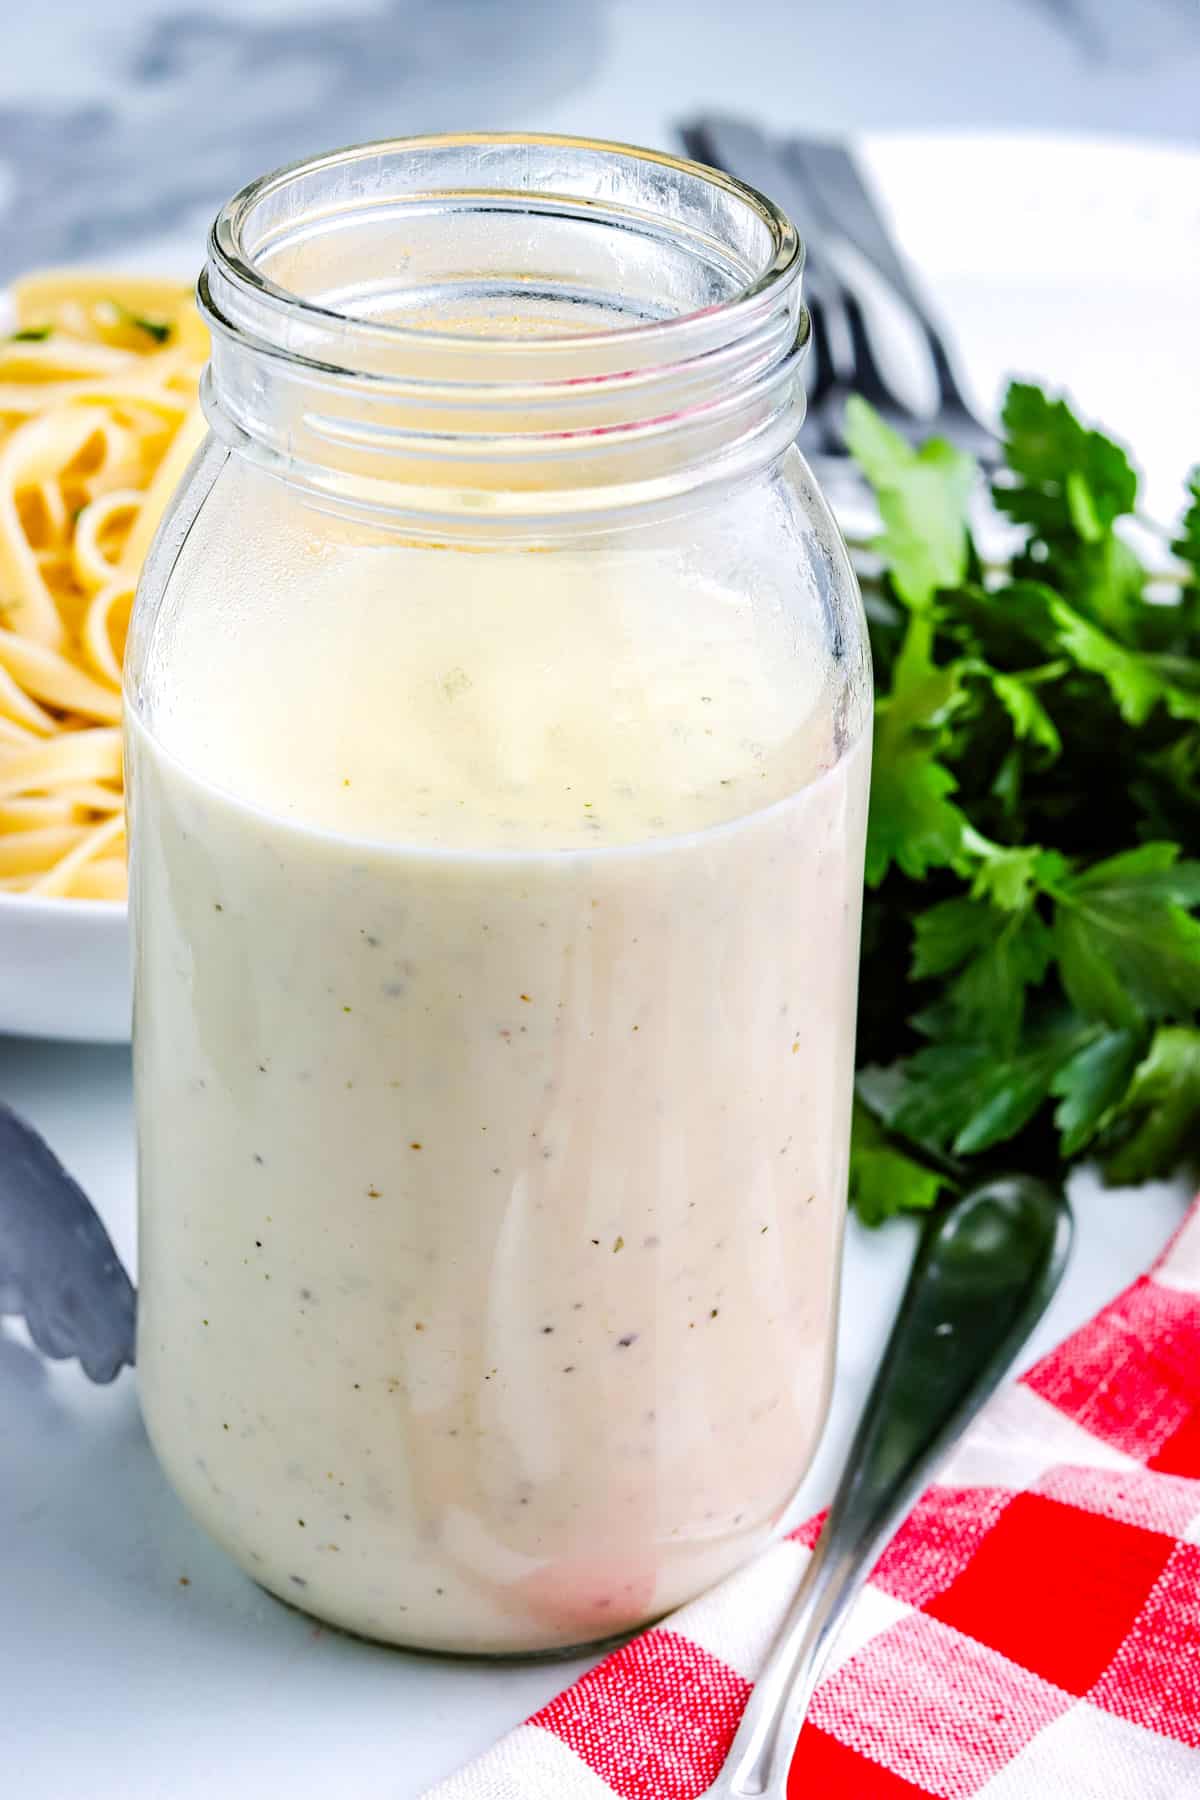 The finished Gluten Free Alfredo Sauce in a glass jar.